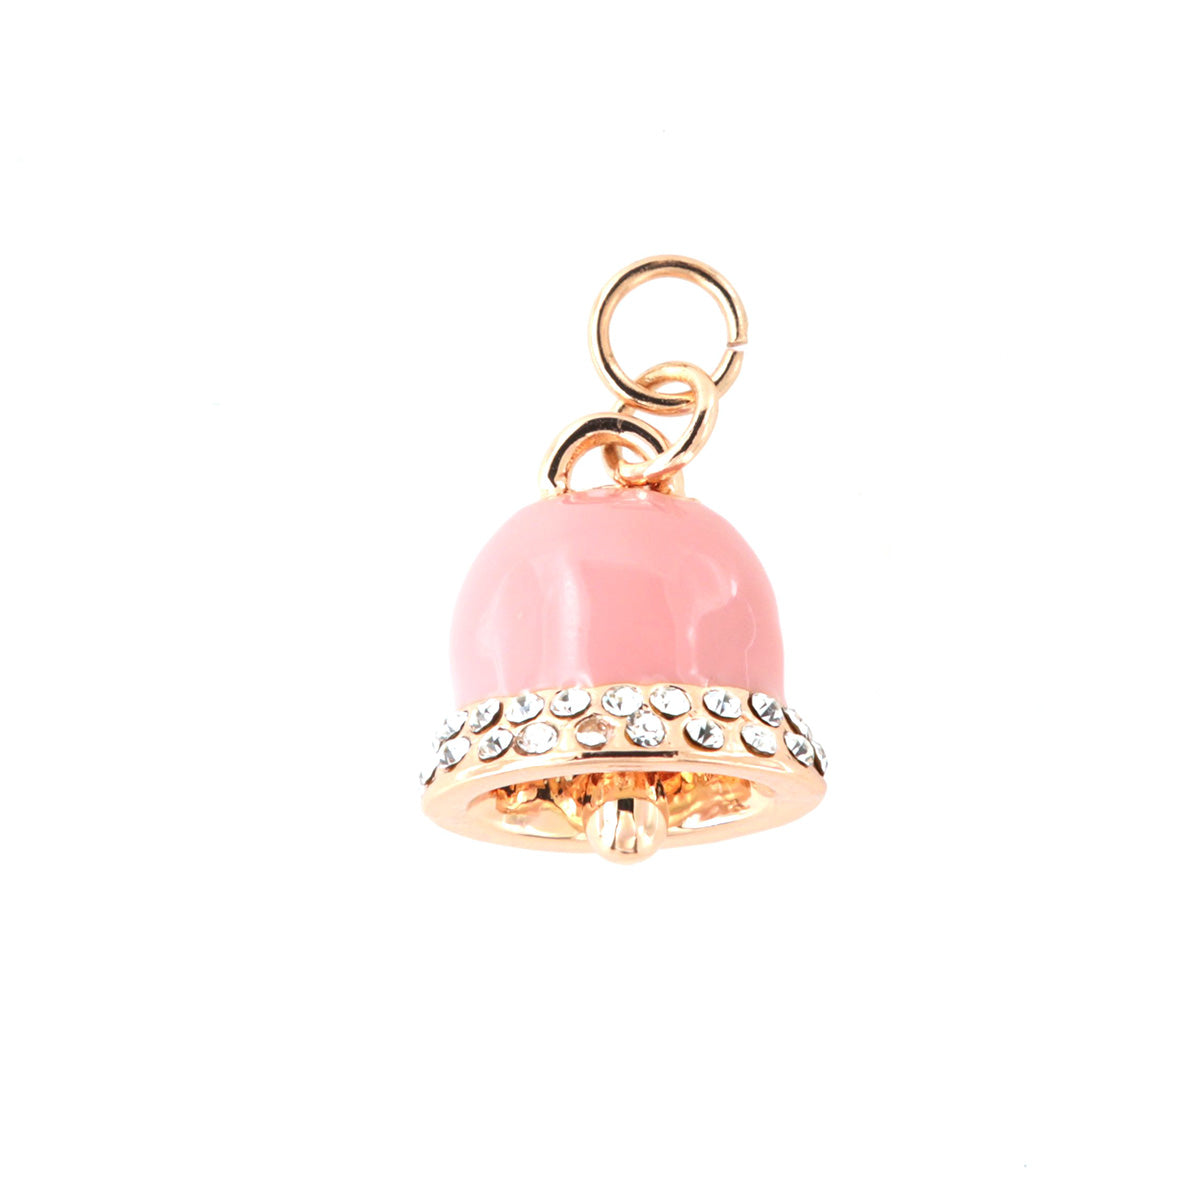 Metal pendant bell bell with pink enamel holder, embellished with white crystals